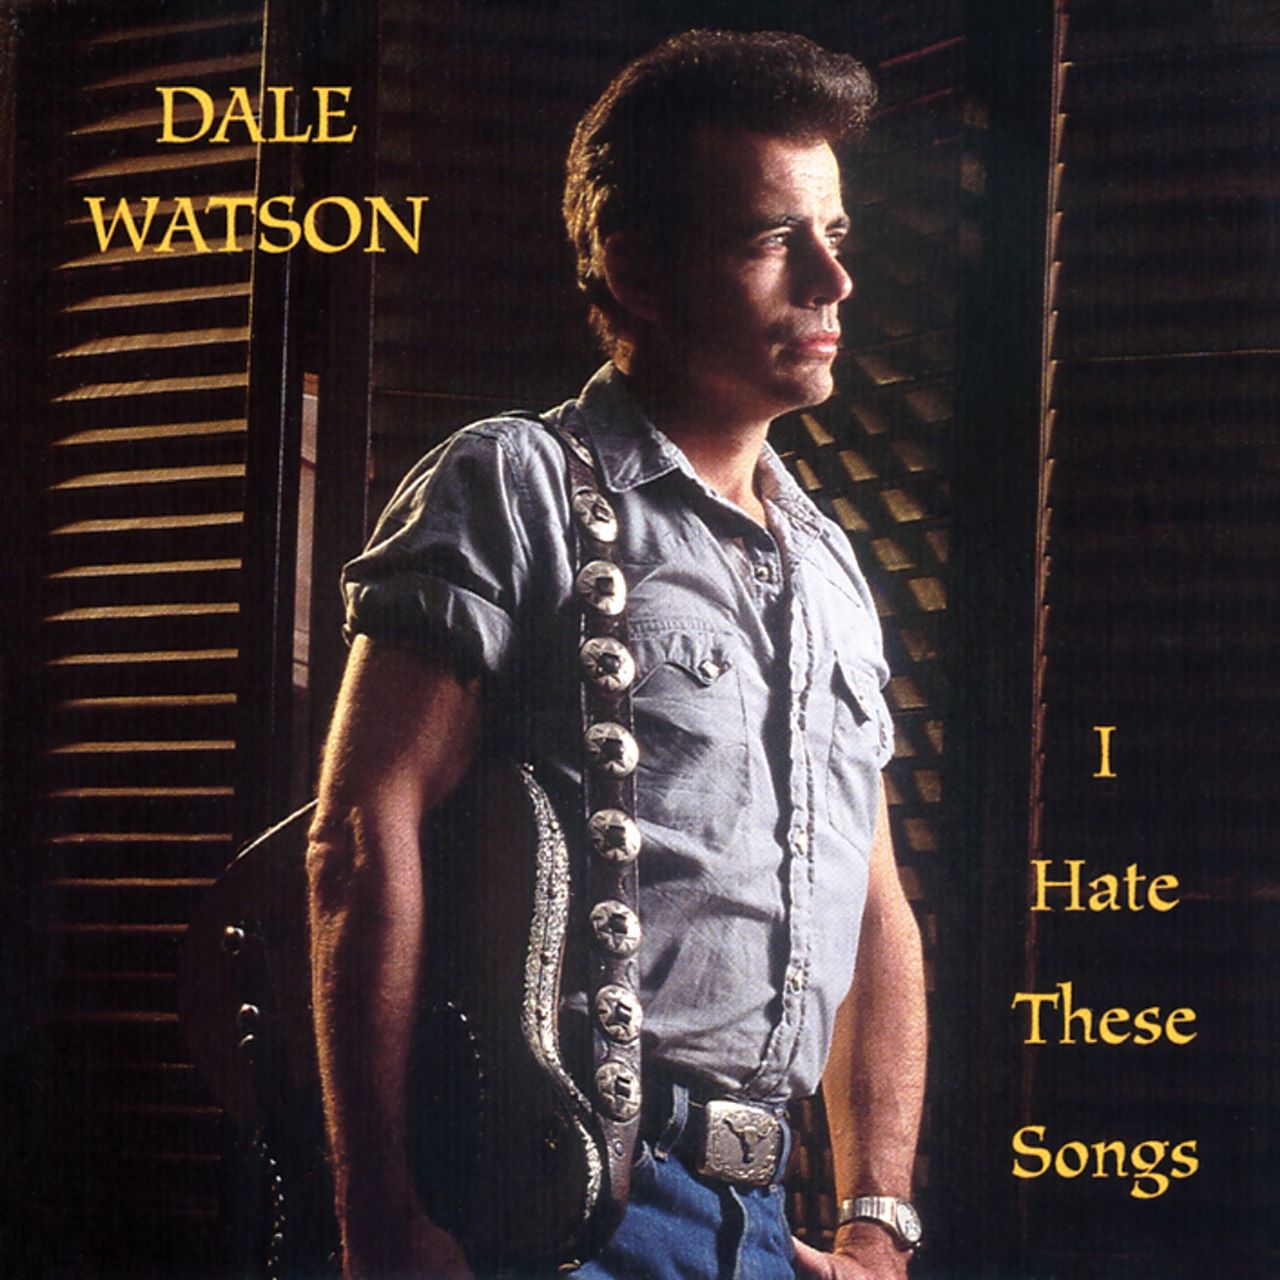 Dale Watson – I Hate These Songs cover album